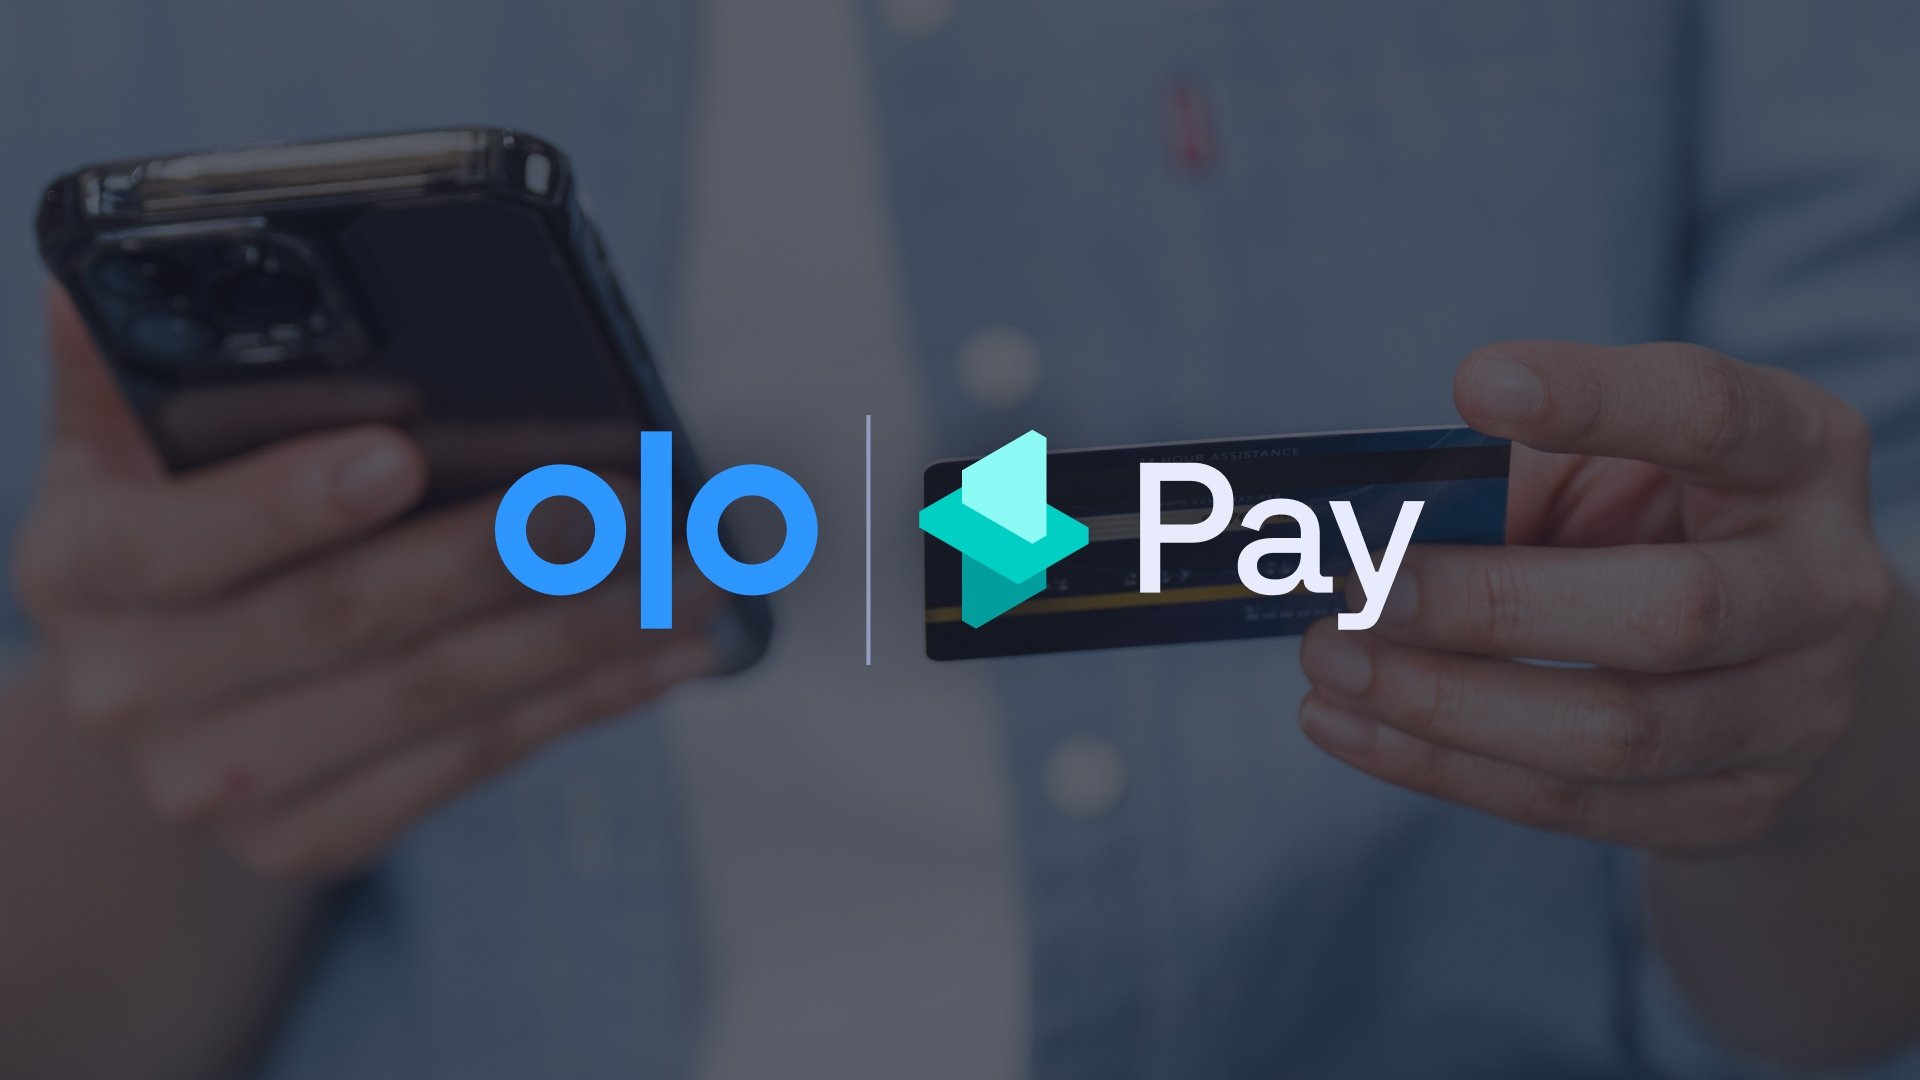 Playbook Olo Pay